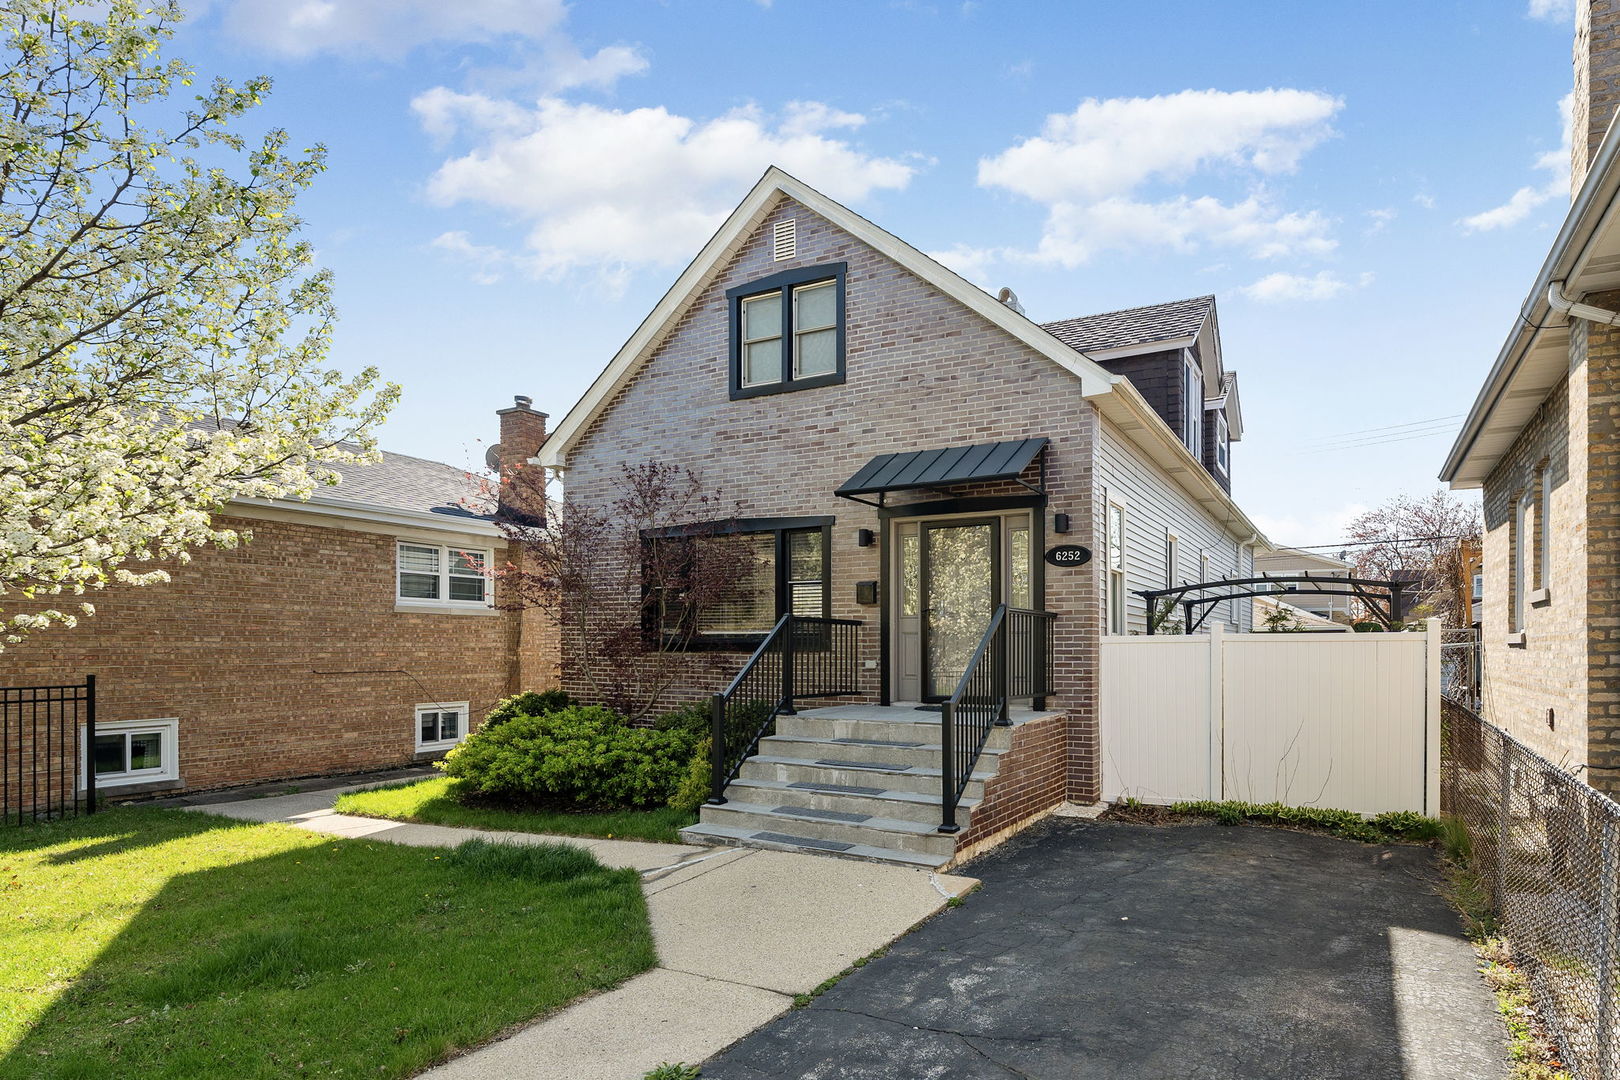 5 House in Norwood Park